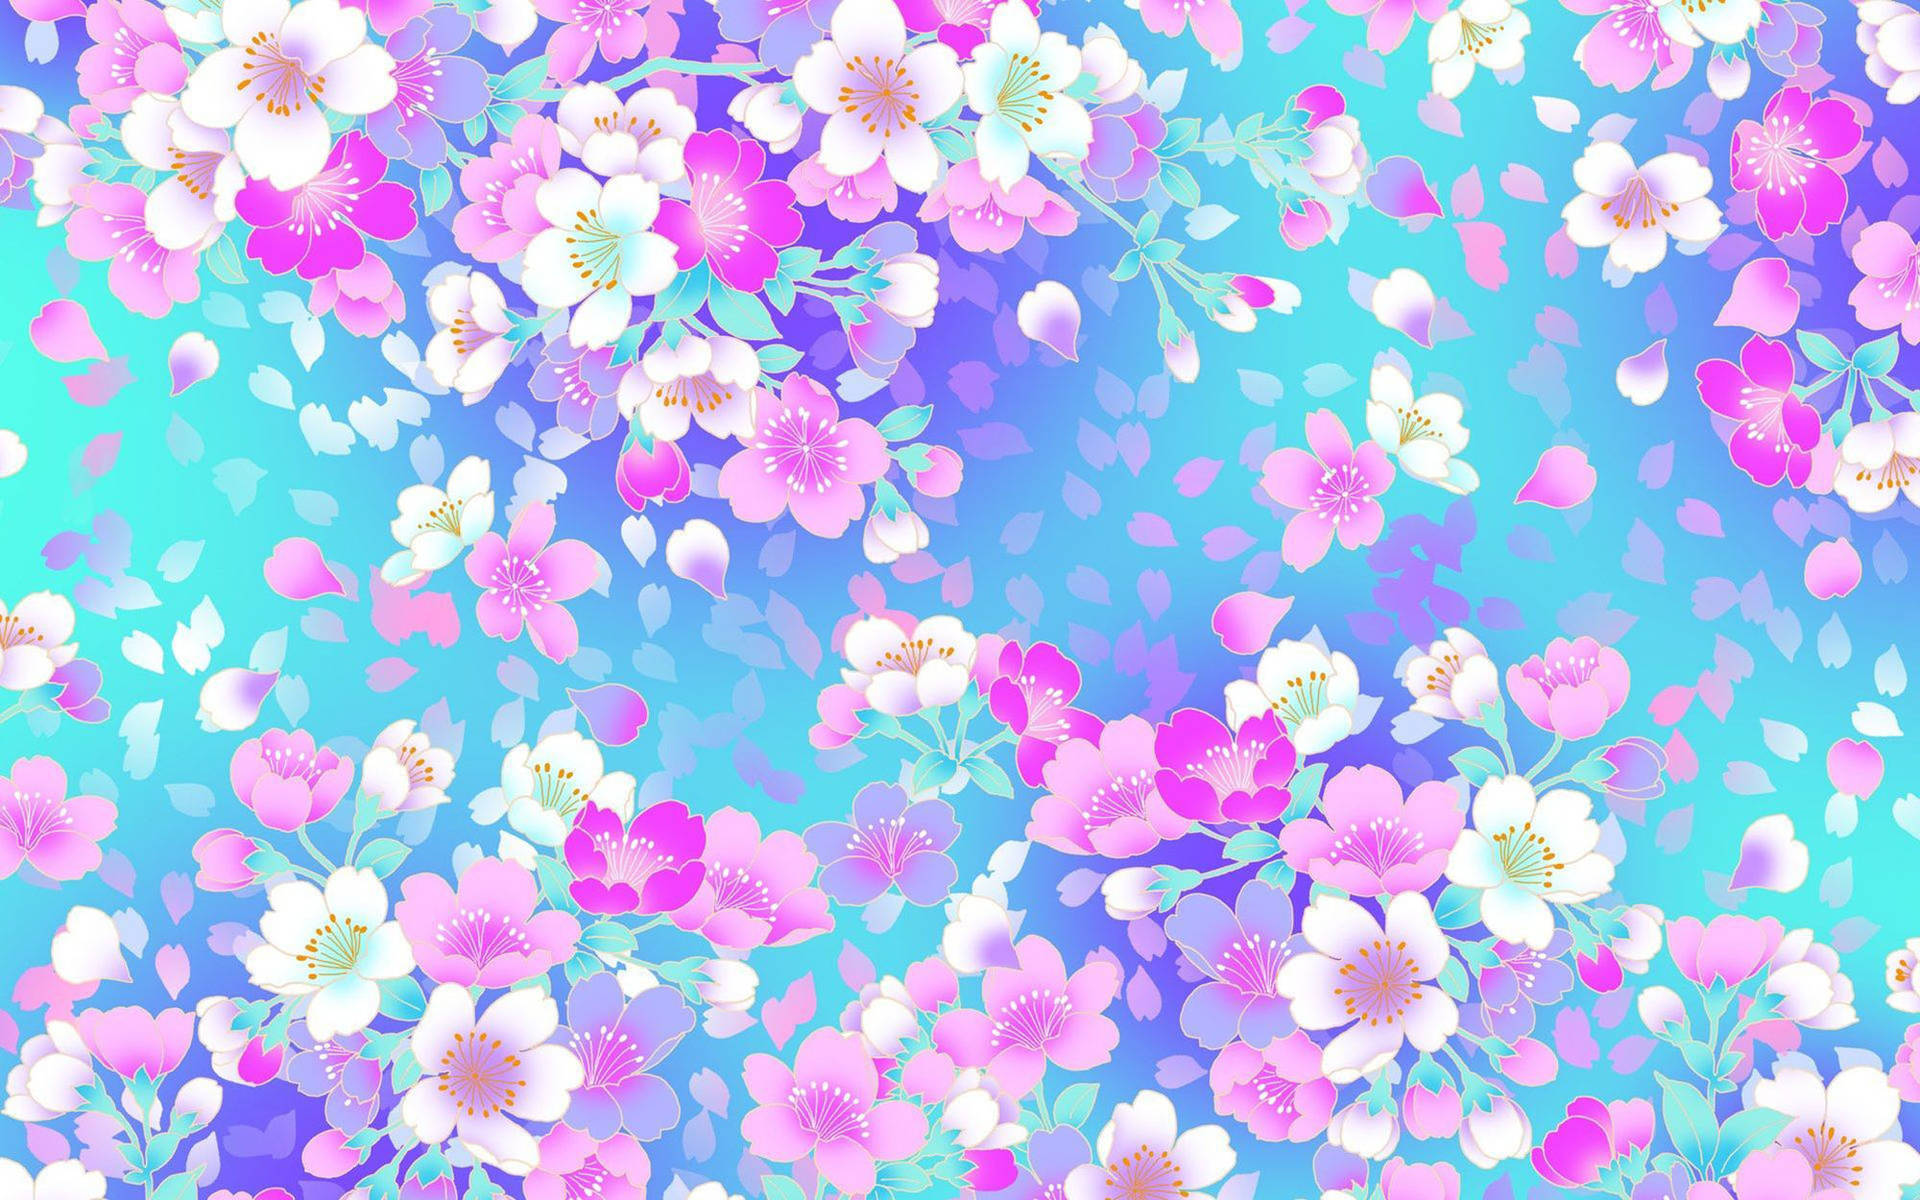 Dope Colorful Girly Floral Wallpaper